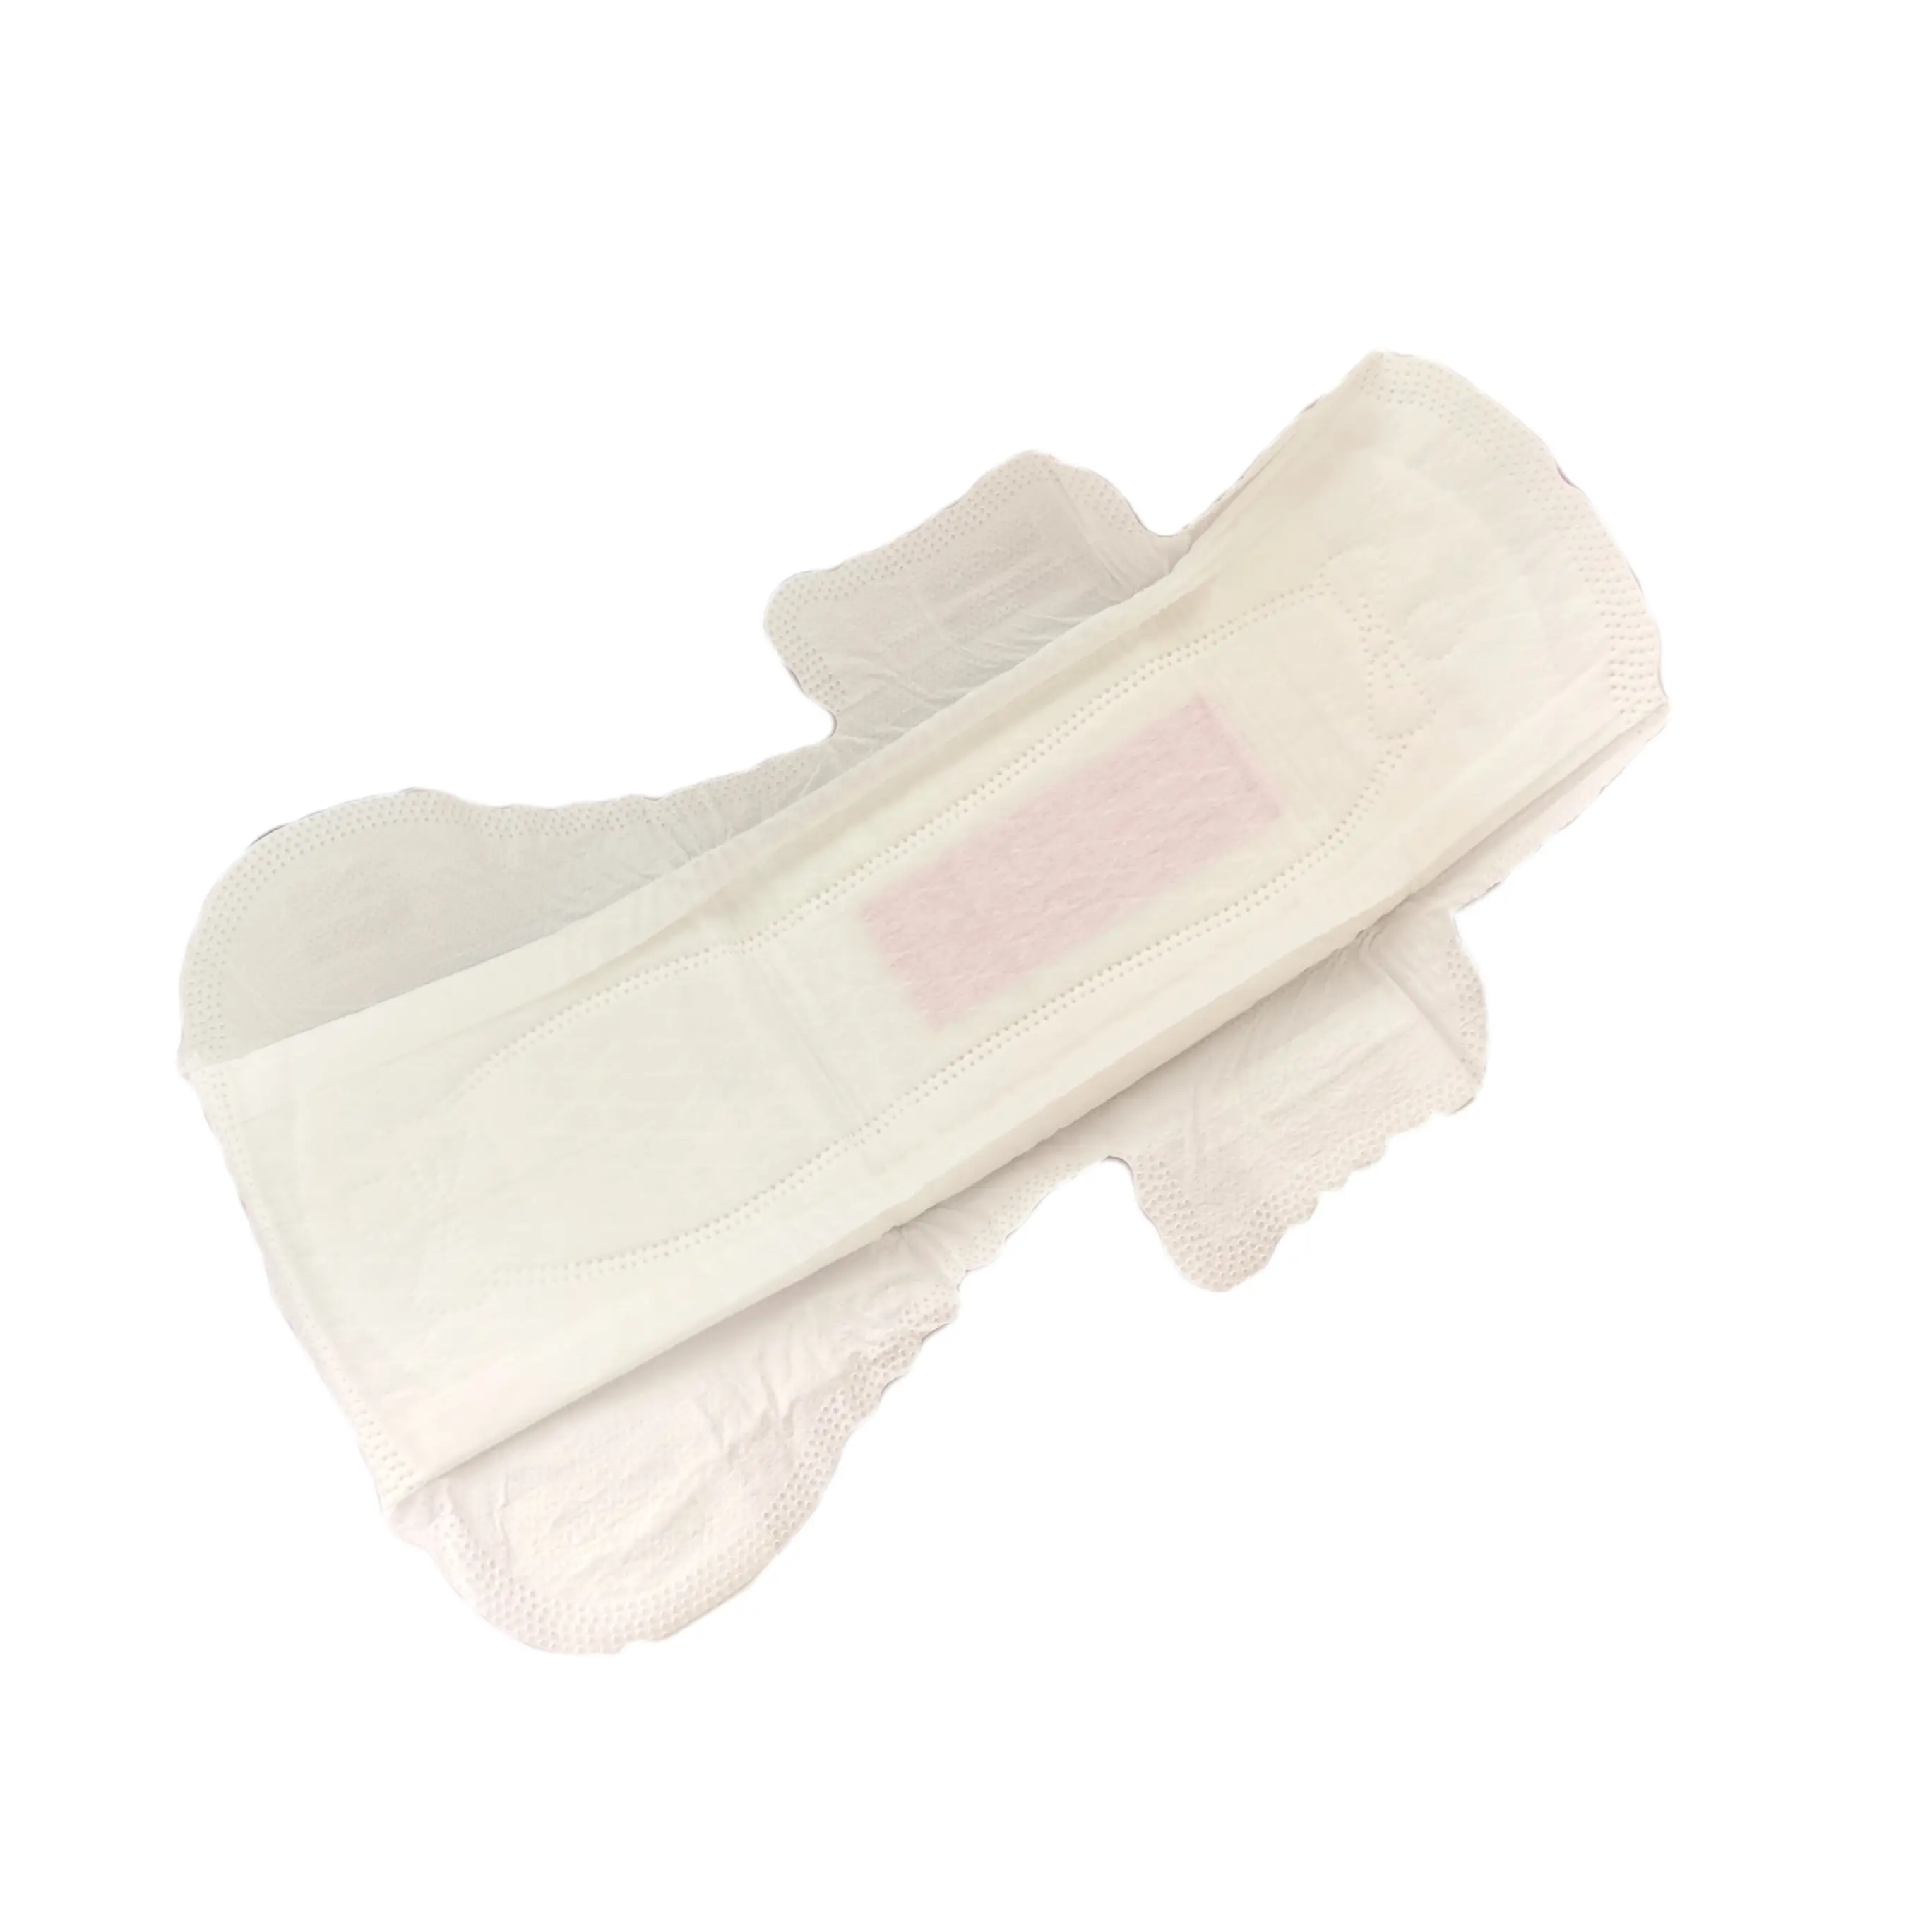 Sanitary Napkins Sanitary Towel Women Pads Panty liner Hygiene Care Protect As Always As forever